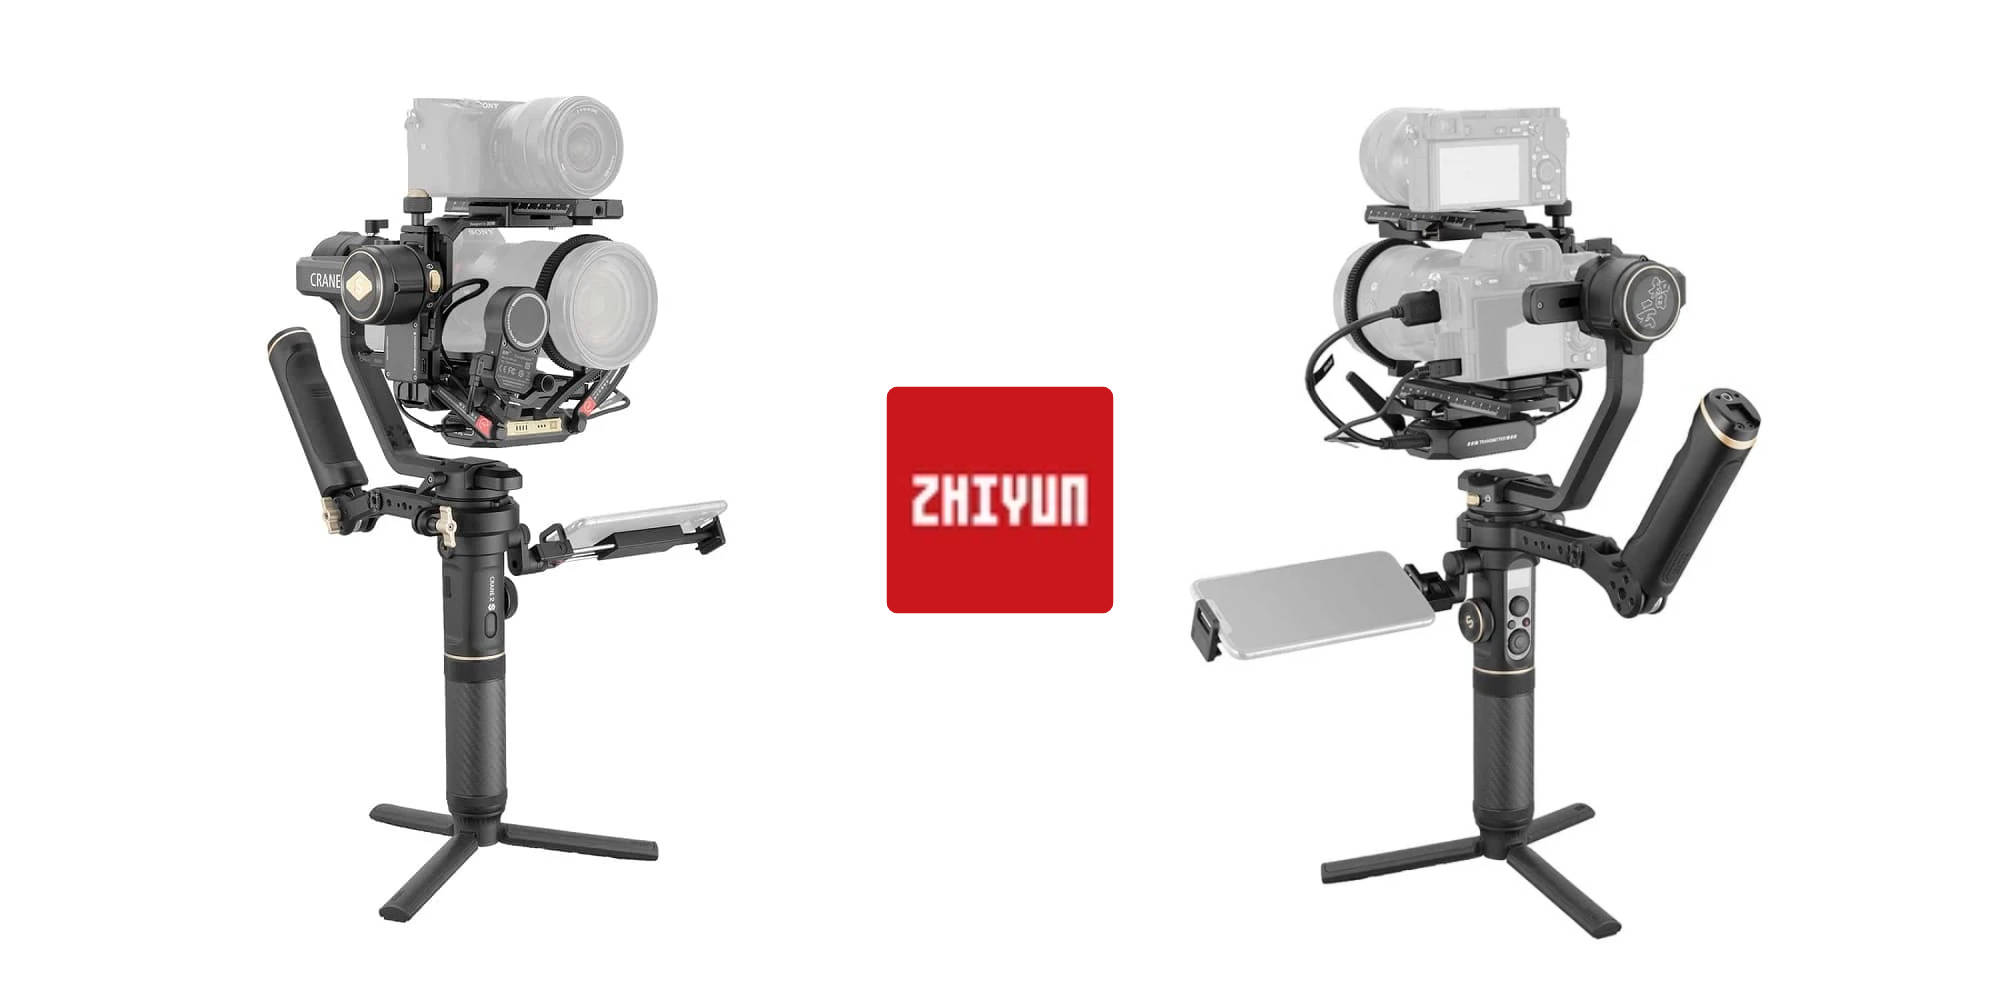 Zhiyun Crane 2S gimbal now available in Pro Package